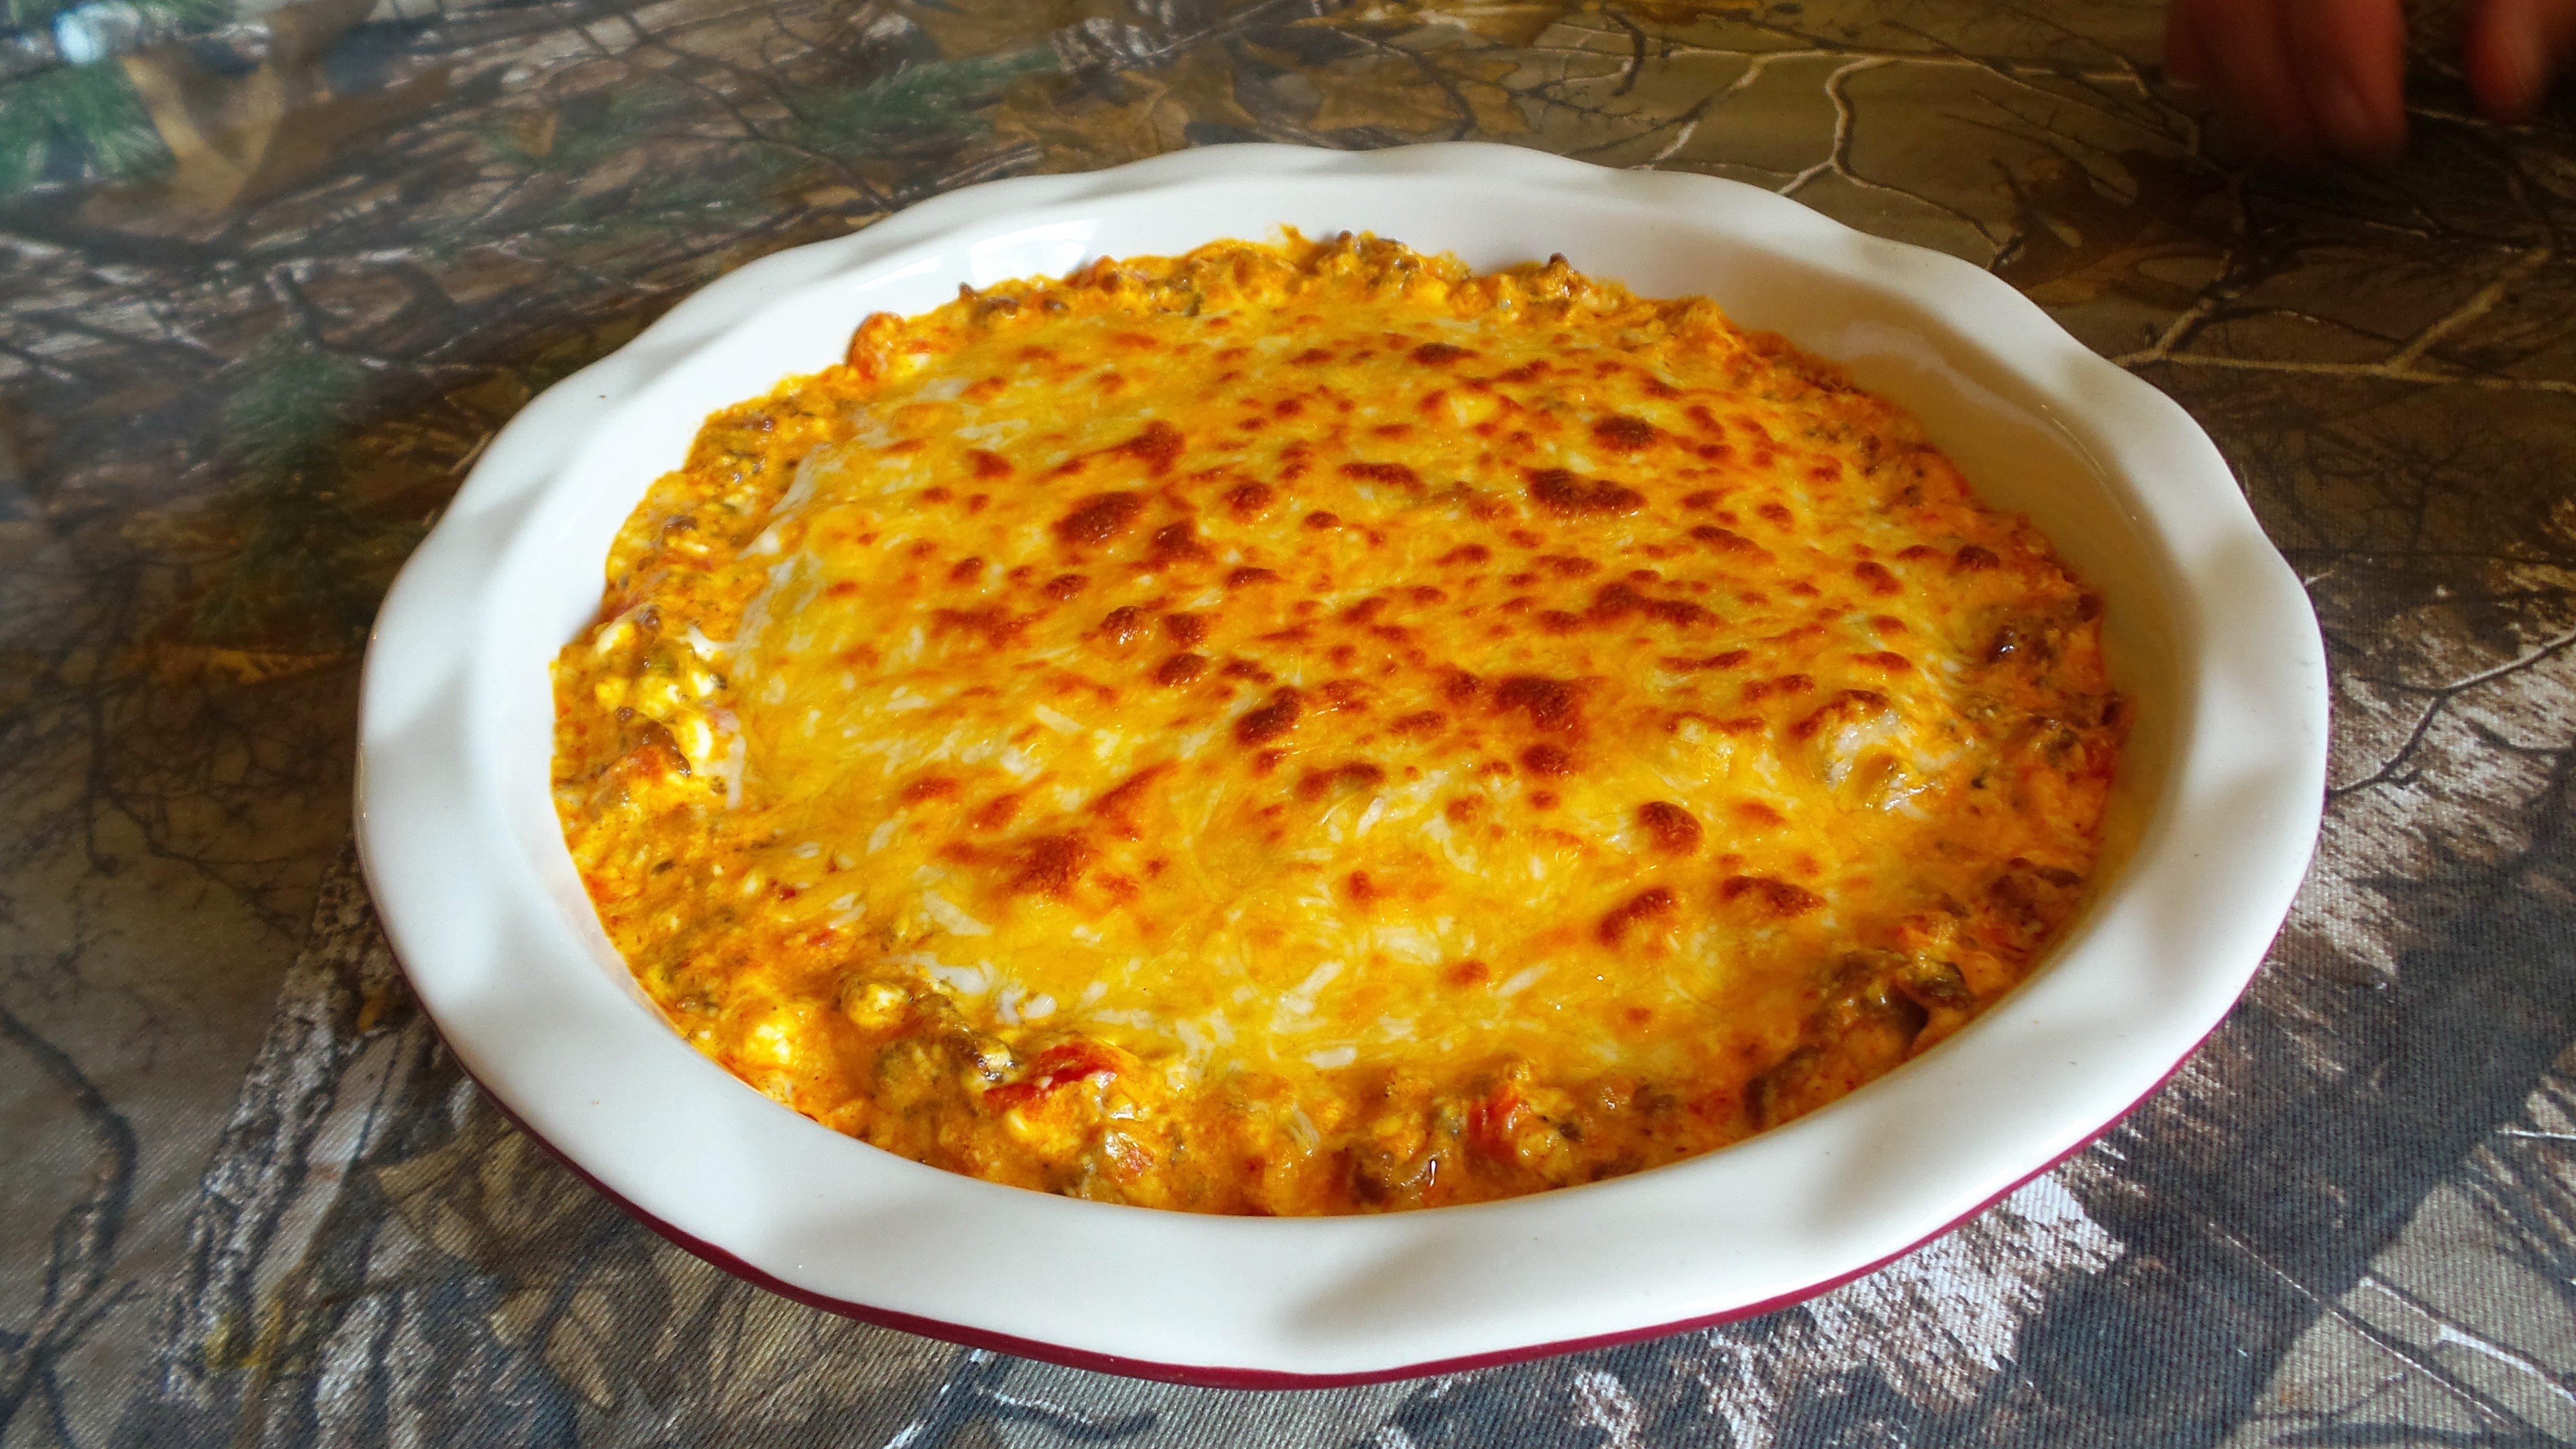 Top the mixture with shredded cheese and bake till the cheese is warm and bubbly.